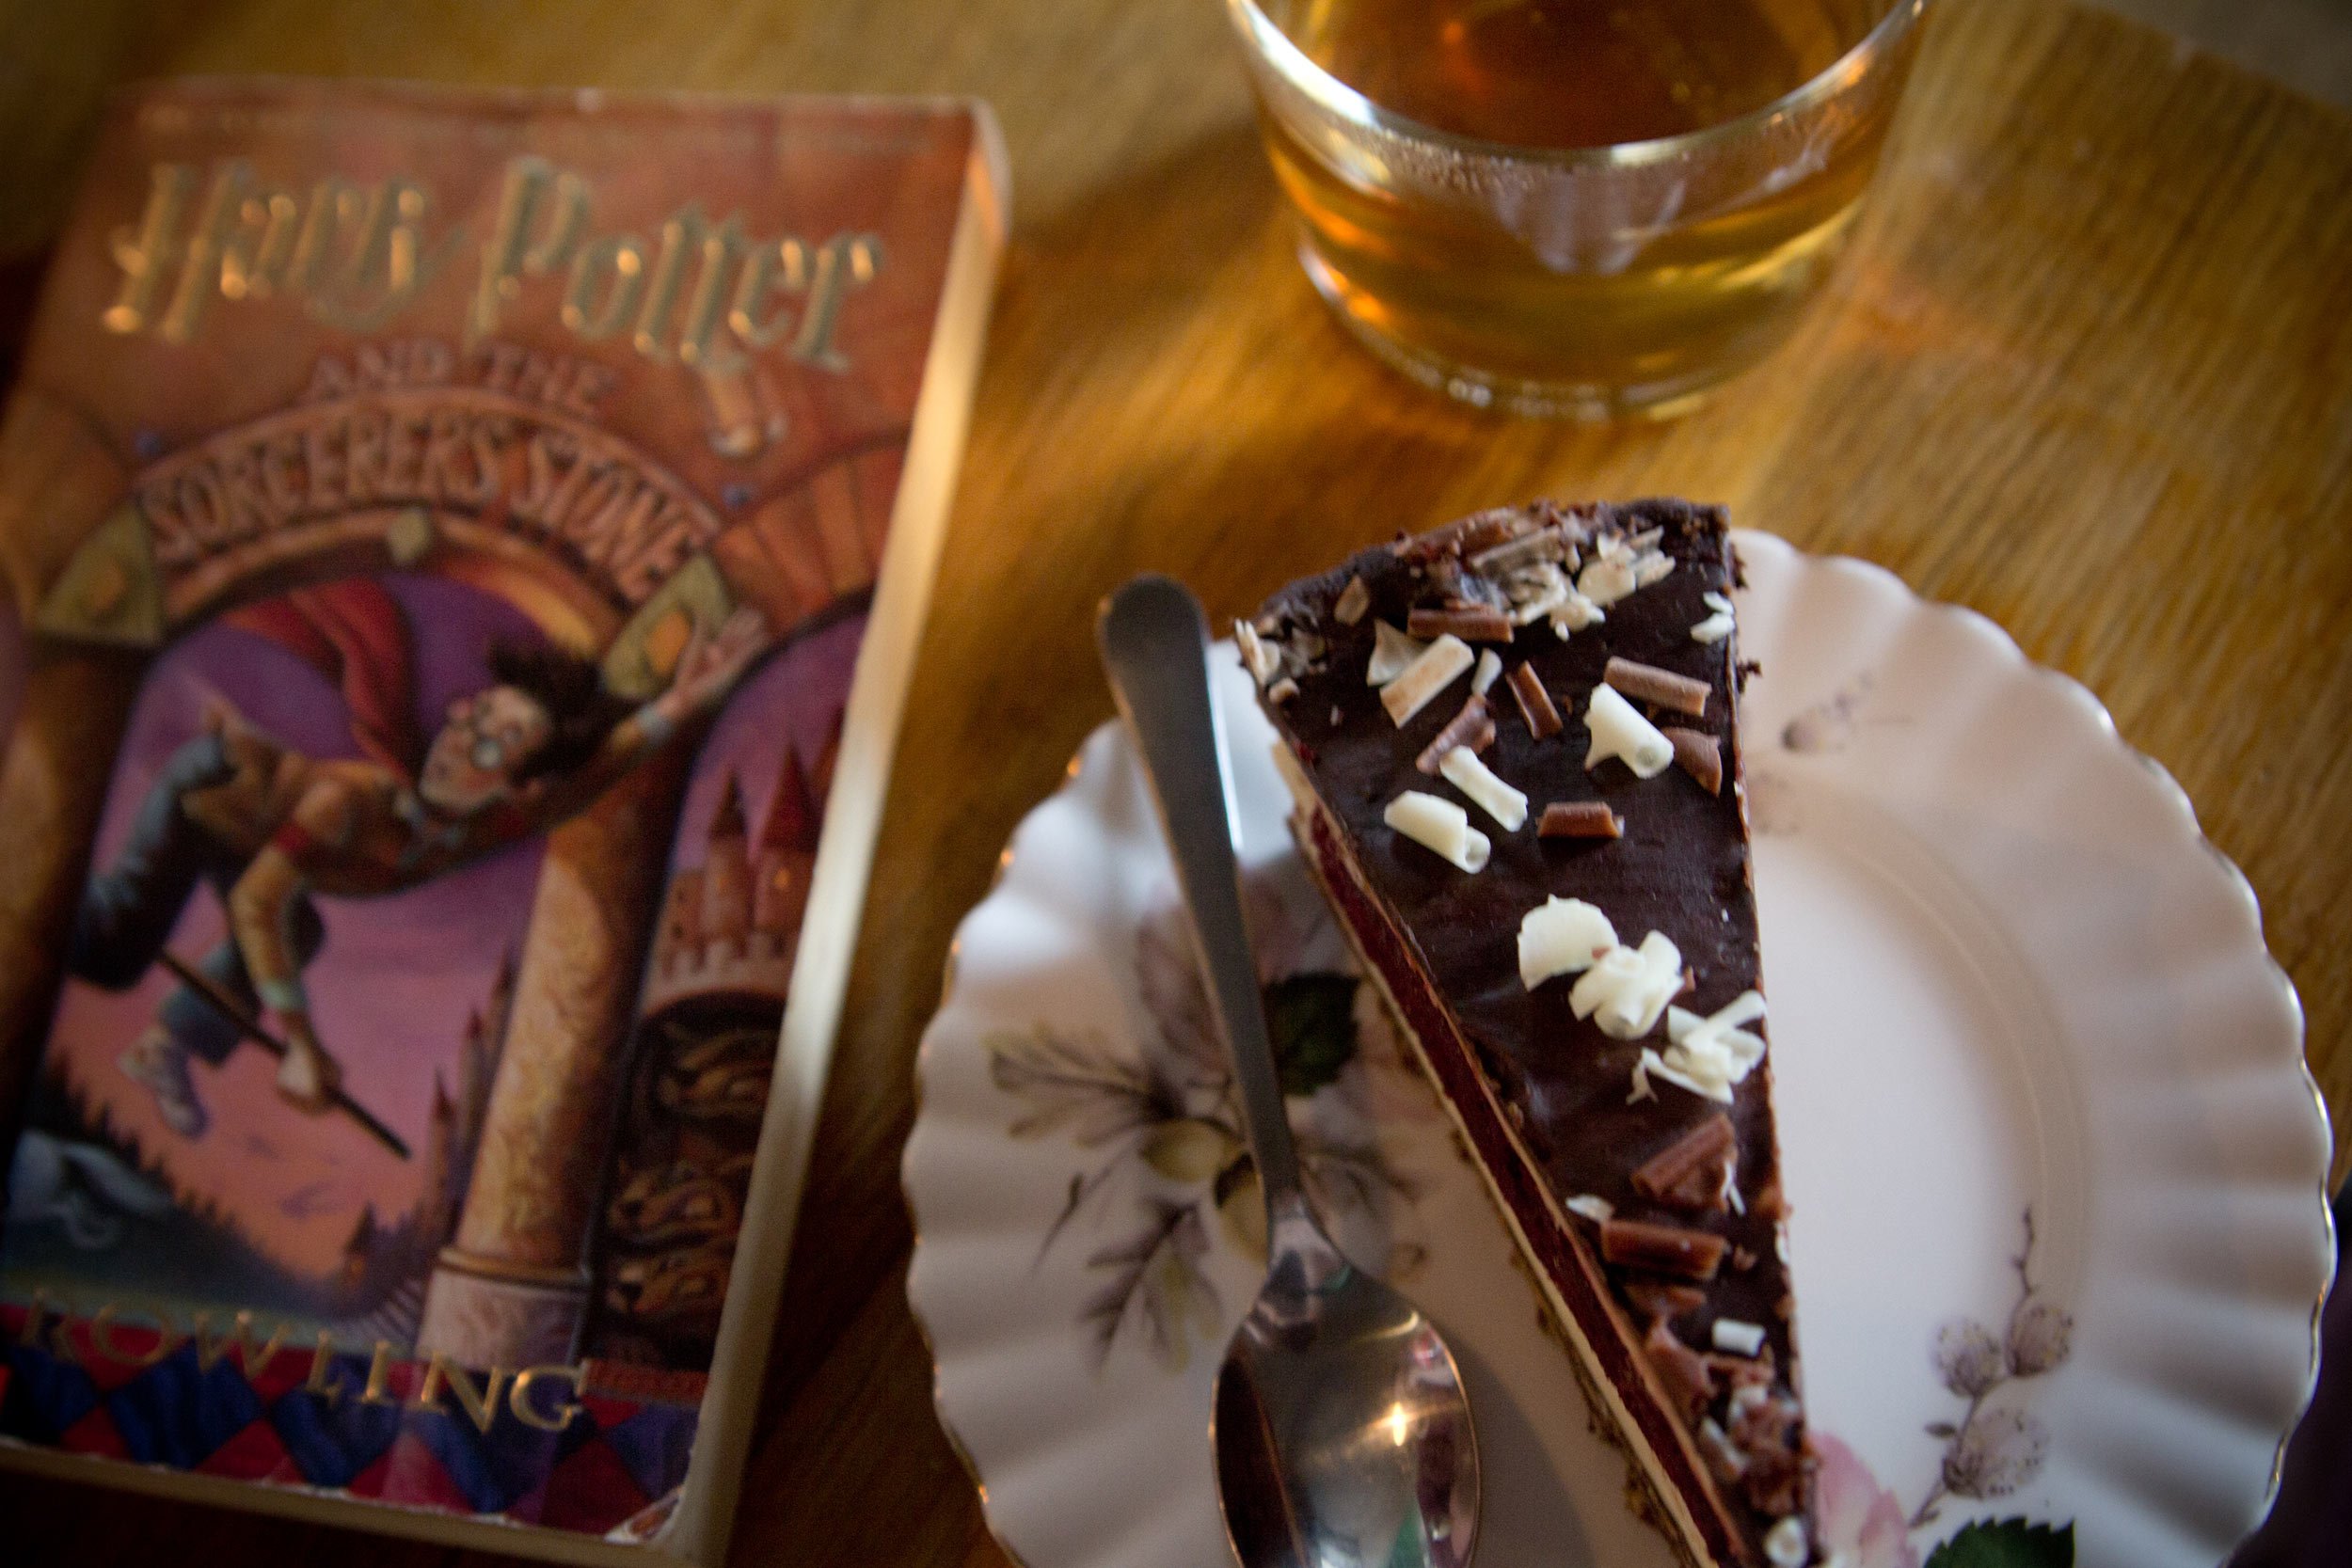 cheescake-and-harry-potter-book-in-nicolsons-cafe-edinburgh